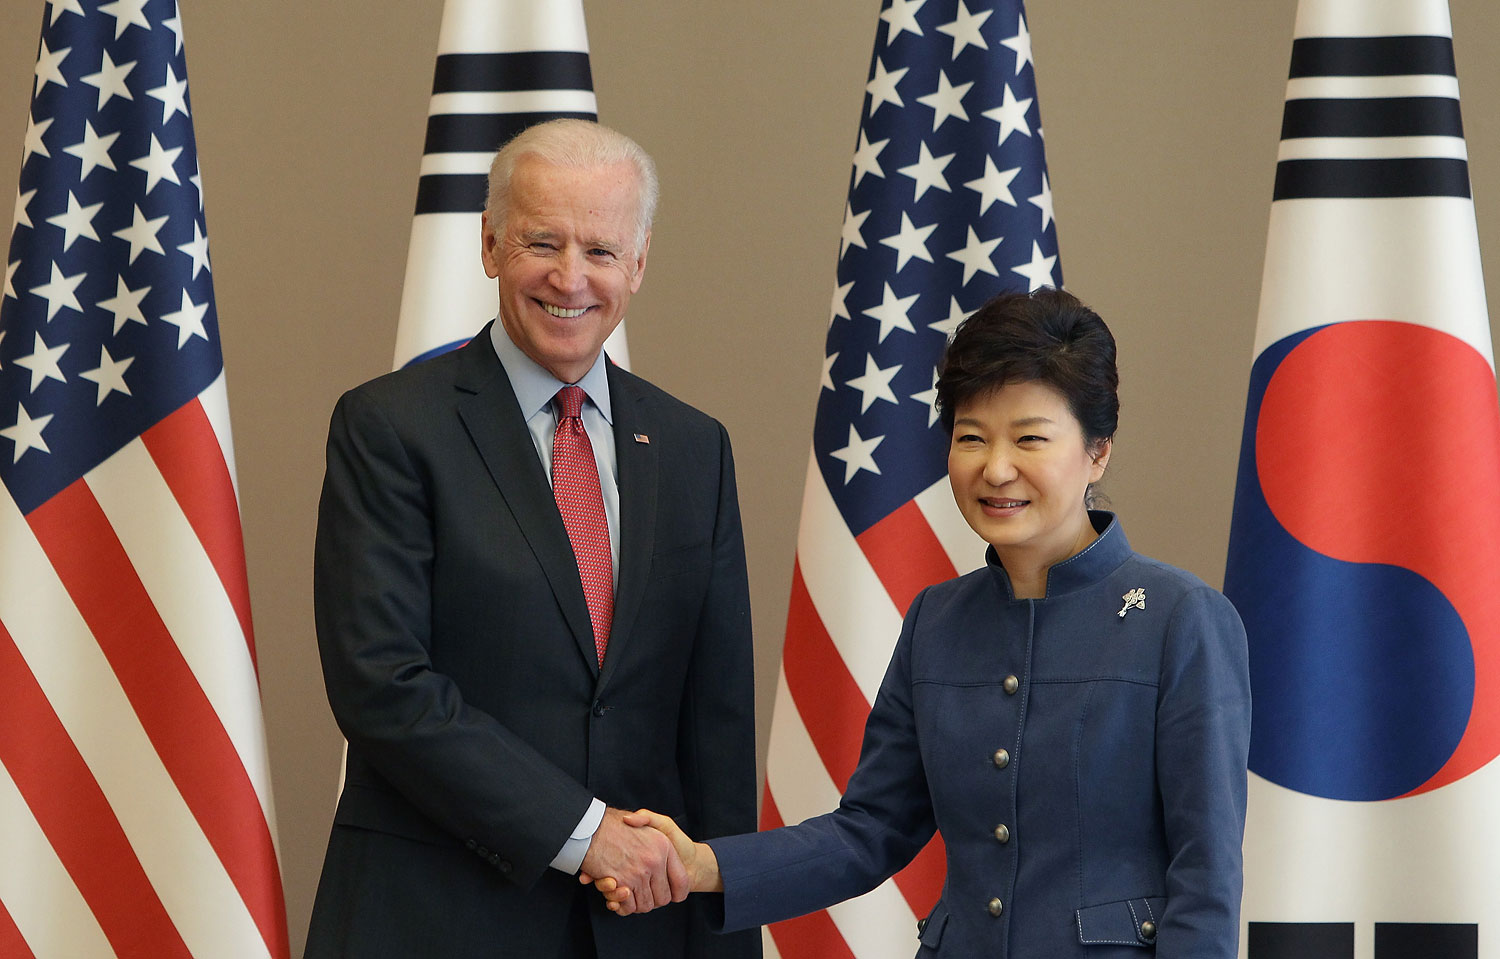 U.S. Vice President Joe Biden shakes hands with South Korean President Park Geun-Hye, right, during their meeting at presidentisl house on Dec. 6, 2013 in Seoul, South Korea to discuss, among other things, the Trans-Pacific Partnership. (Chung Sung-Jun&mdash;Getty Images)